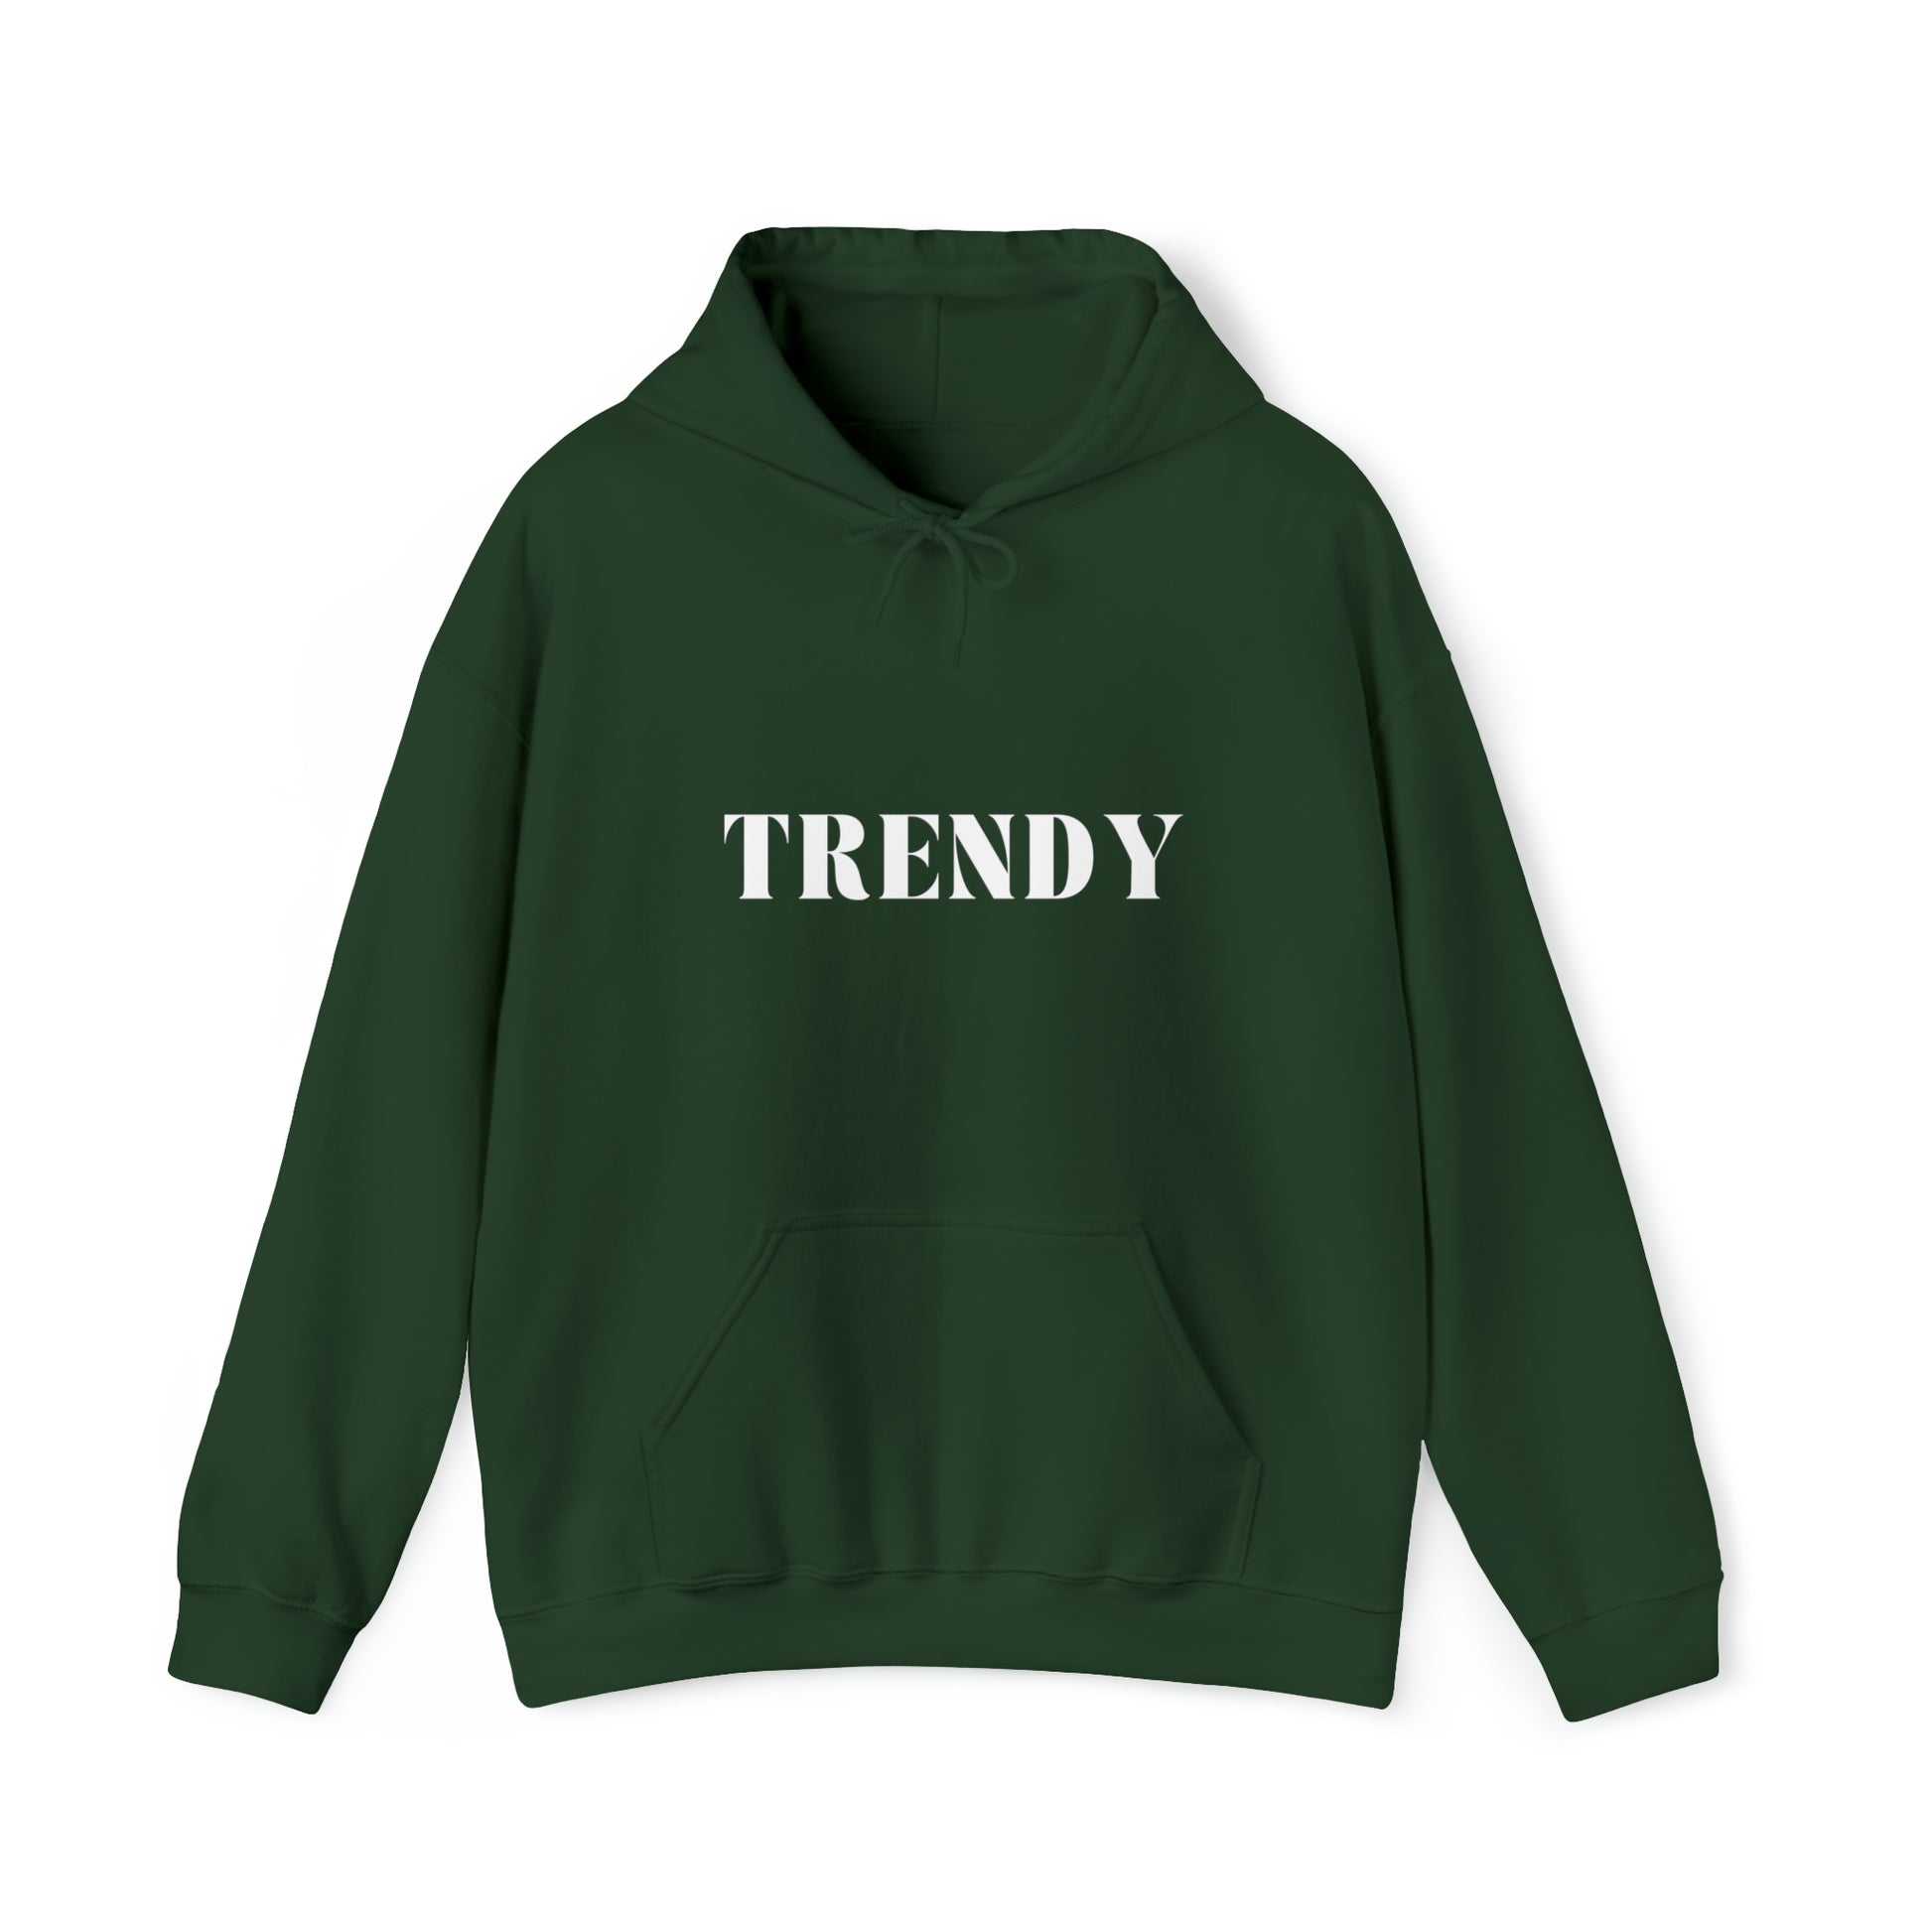 S Forest Green Trendy Hoodie from HoodySZN.com